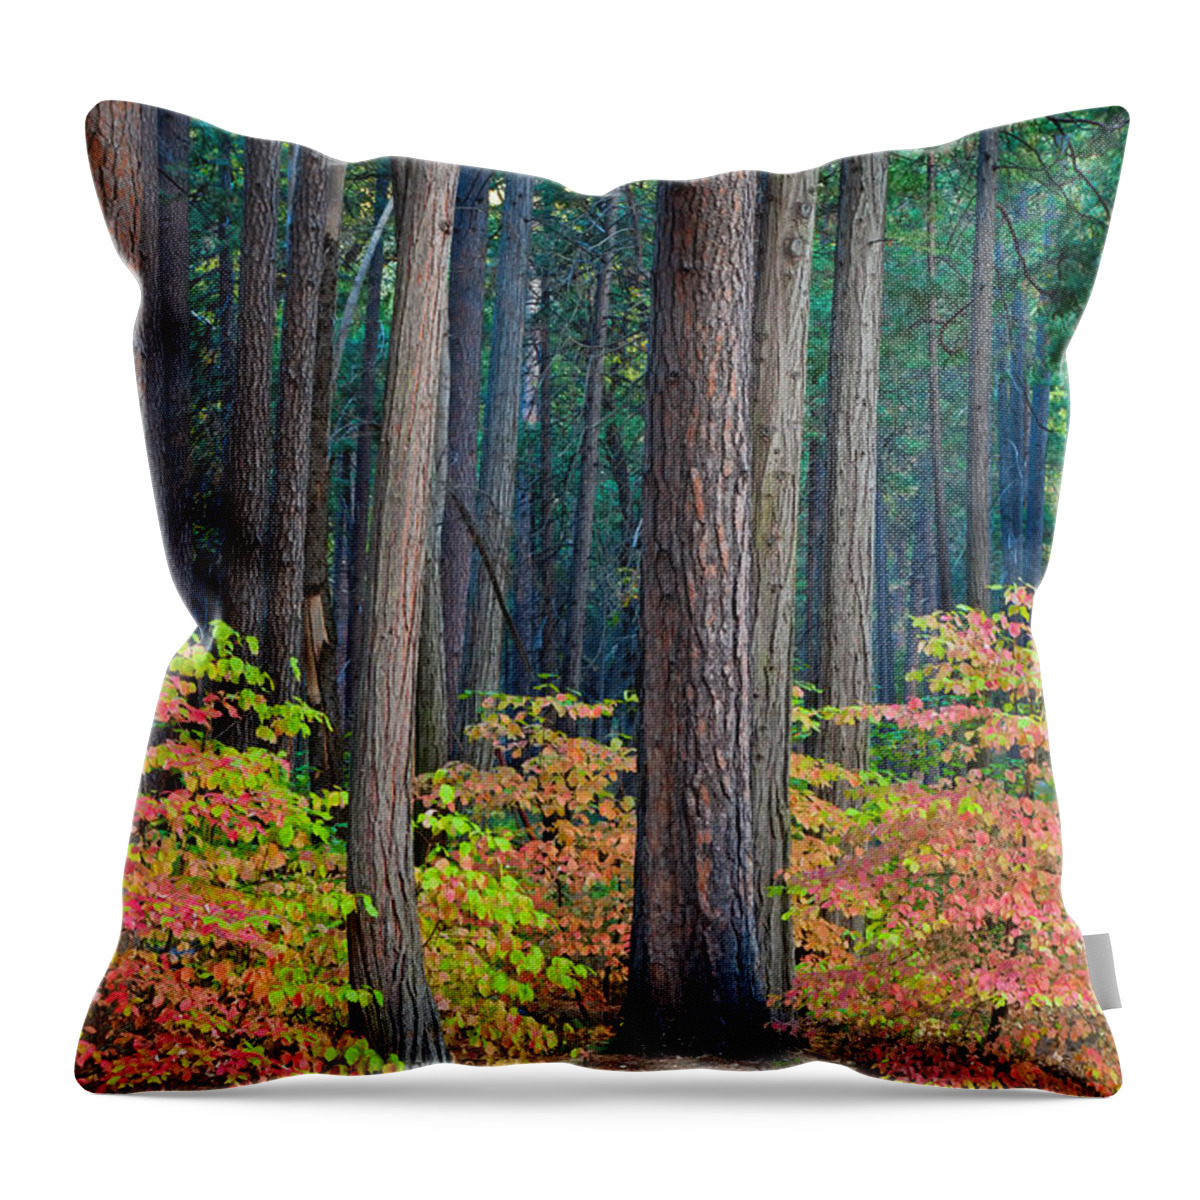 Landscape Throw Pillow featuring the photograph Enchanted Forest by Jonathan Nguyen